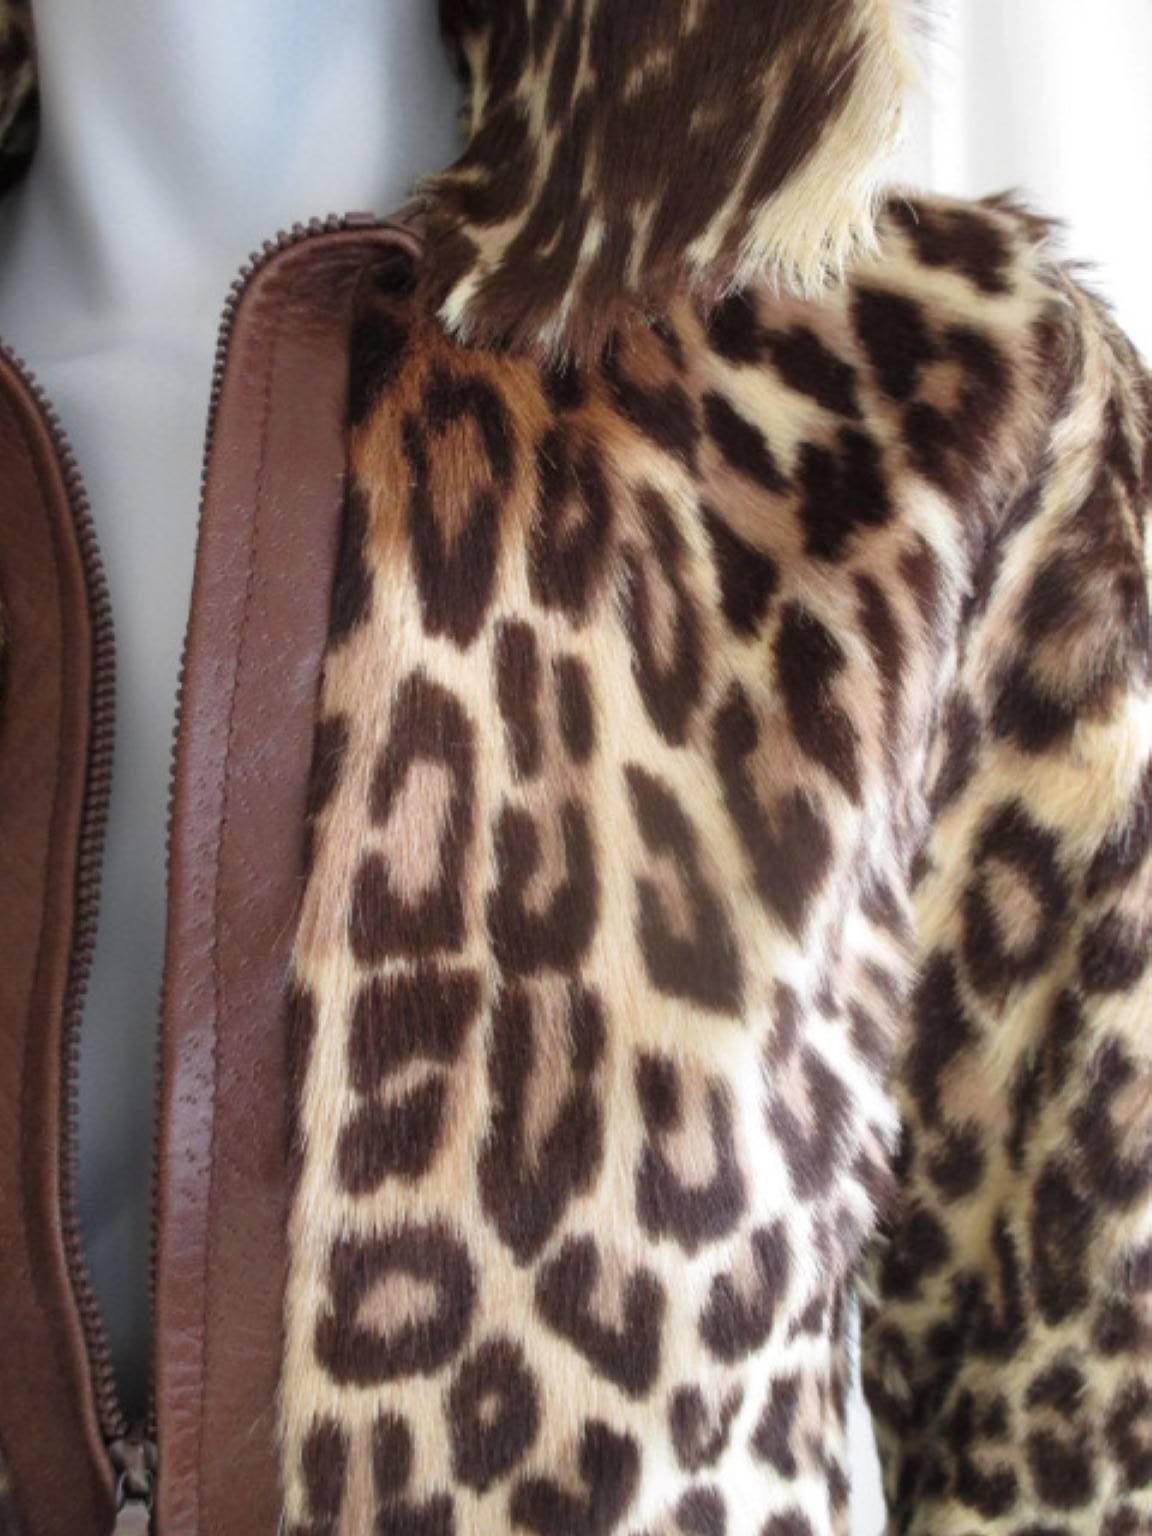 This leopard style jacket is trimmed with leather at the front and closes with a zipper and has 2 pockets.
Its in fair vintage condition with wear at the collar.
The quality of the fur is thick and not supple.
Size fits like a small.

Please note